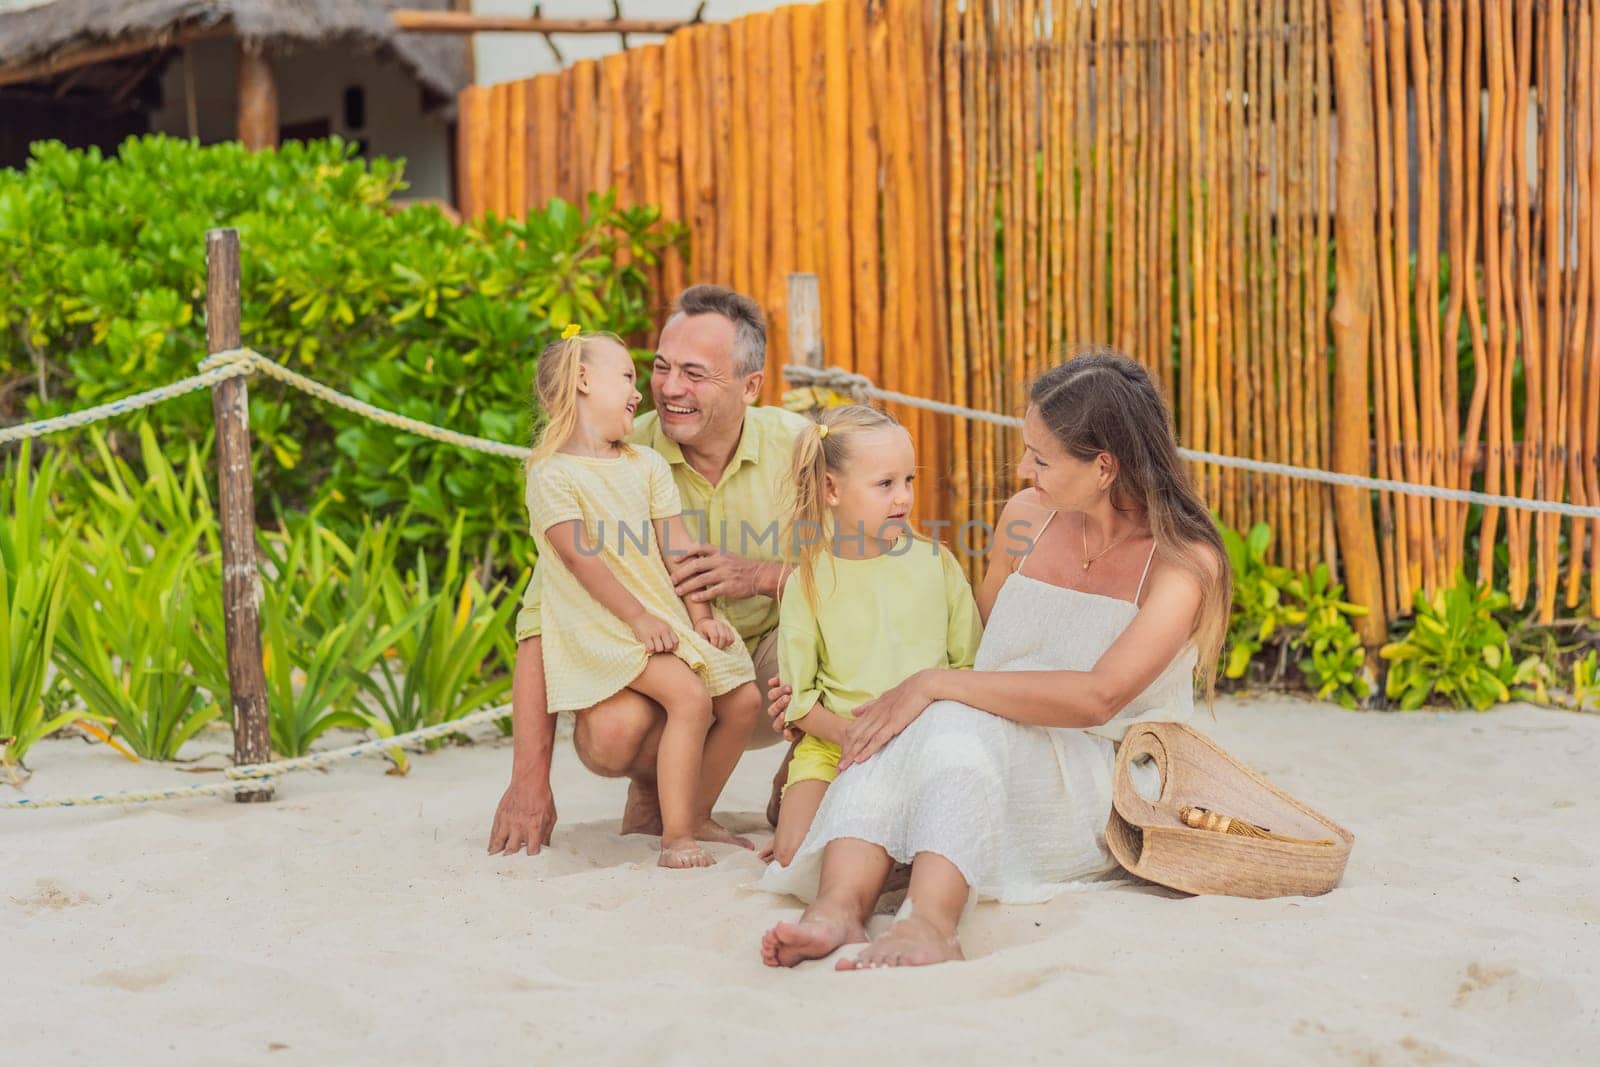 A joyful family, two girls, dad, and a pregnant mom, bask in tropical beach bliss, celebrating a radiant pregnancy amidst paradise by galitskaya